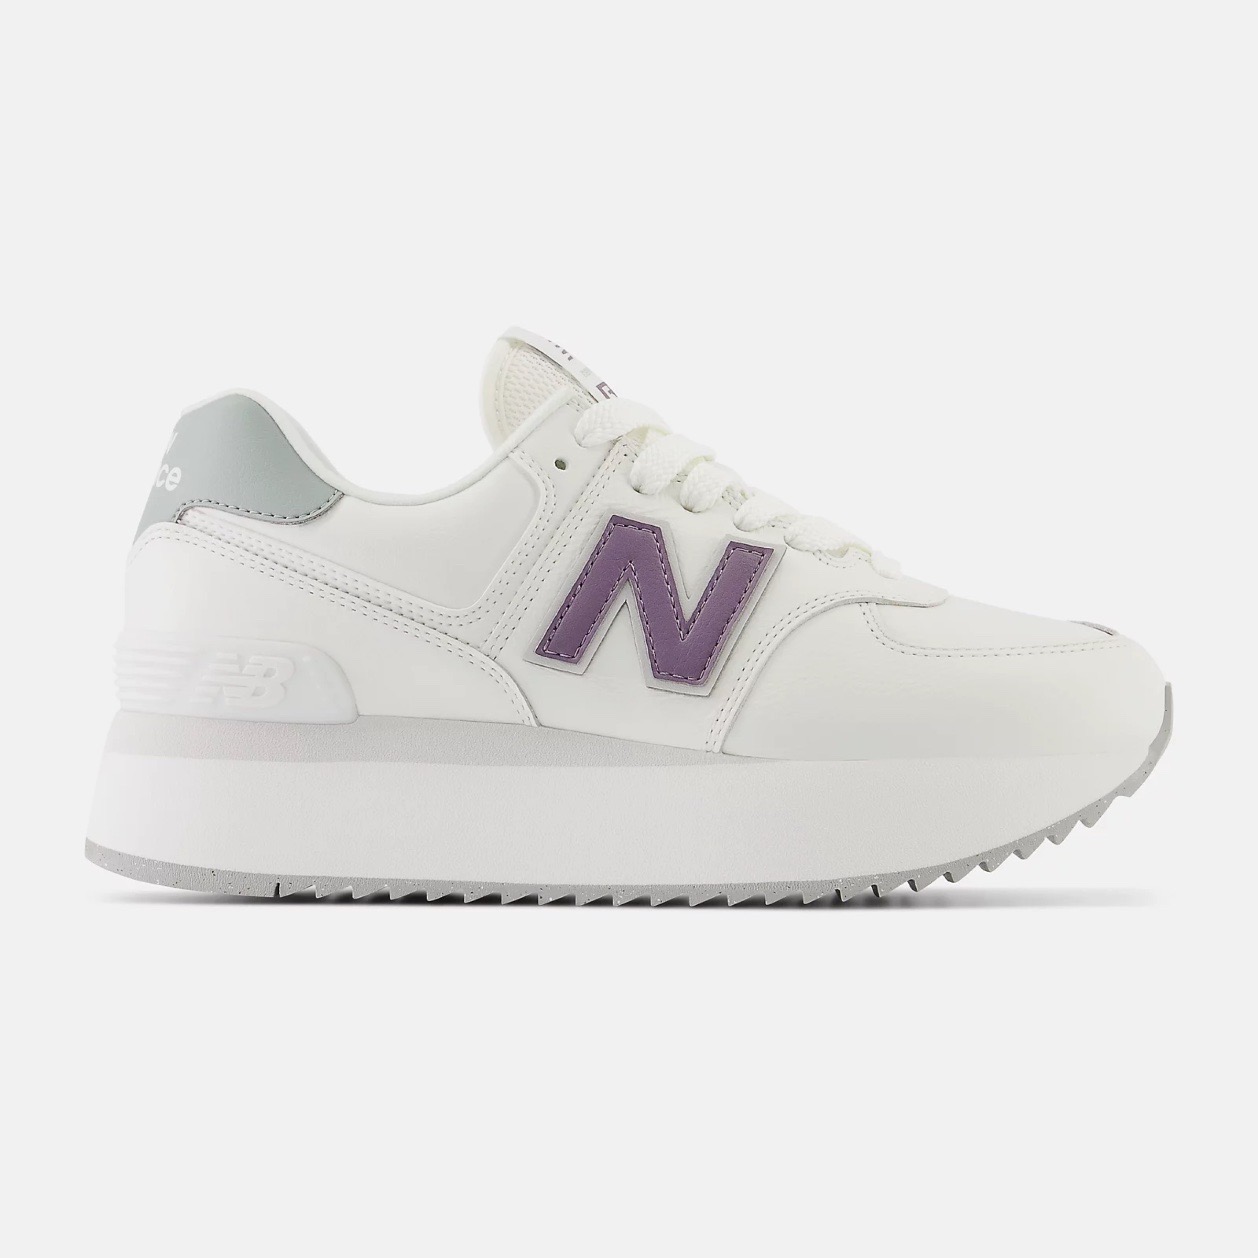 New Balance 574+ White with nori and pink moon